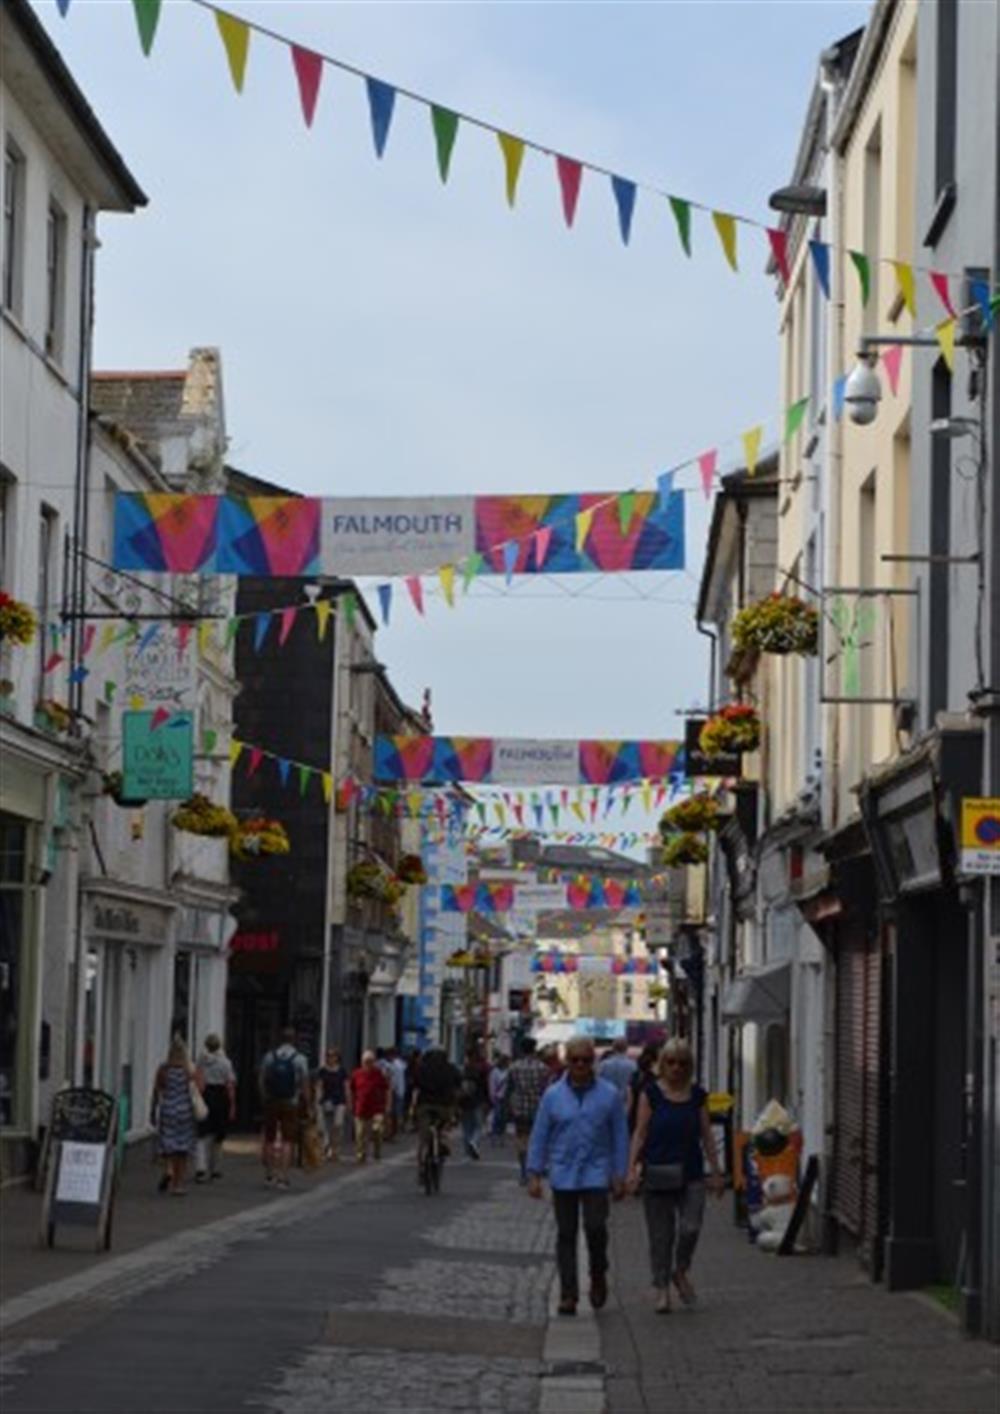 Falmouth town has an array of shops, plus a range of restaurants, cafes and art galleries. at Demelza 2 in Helford Passage